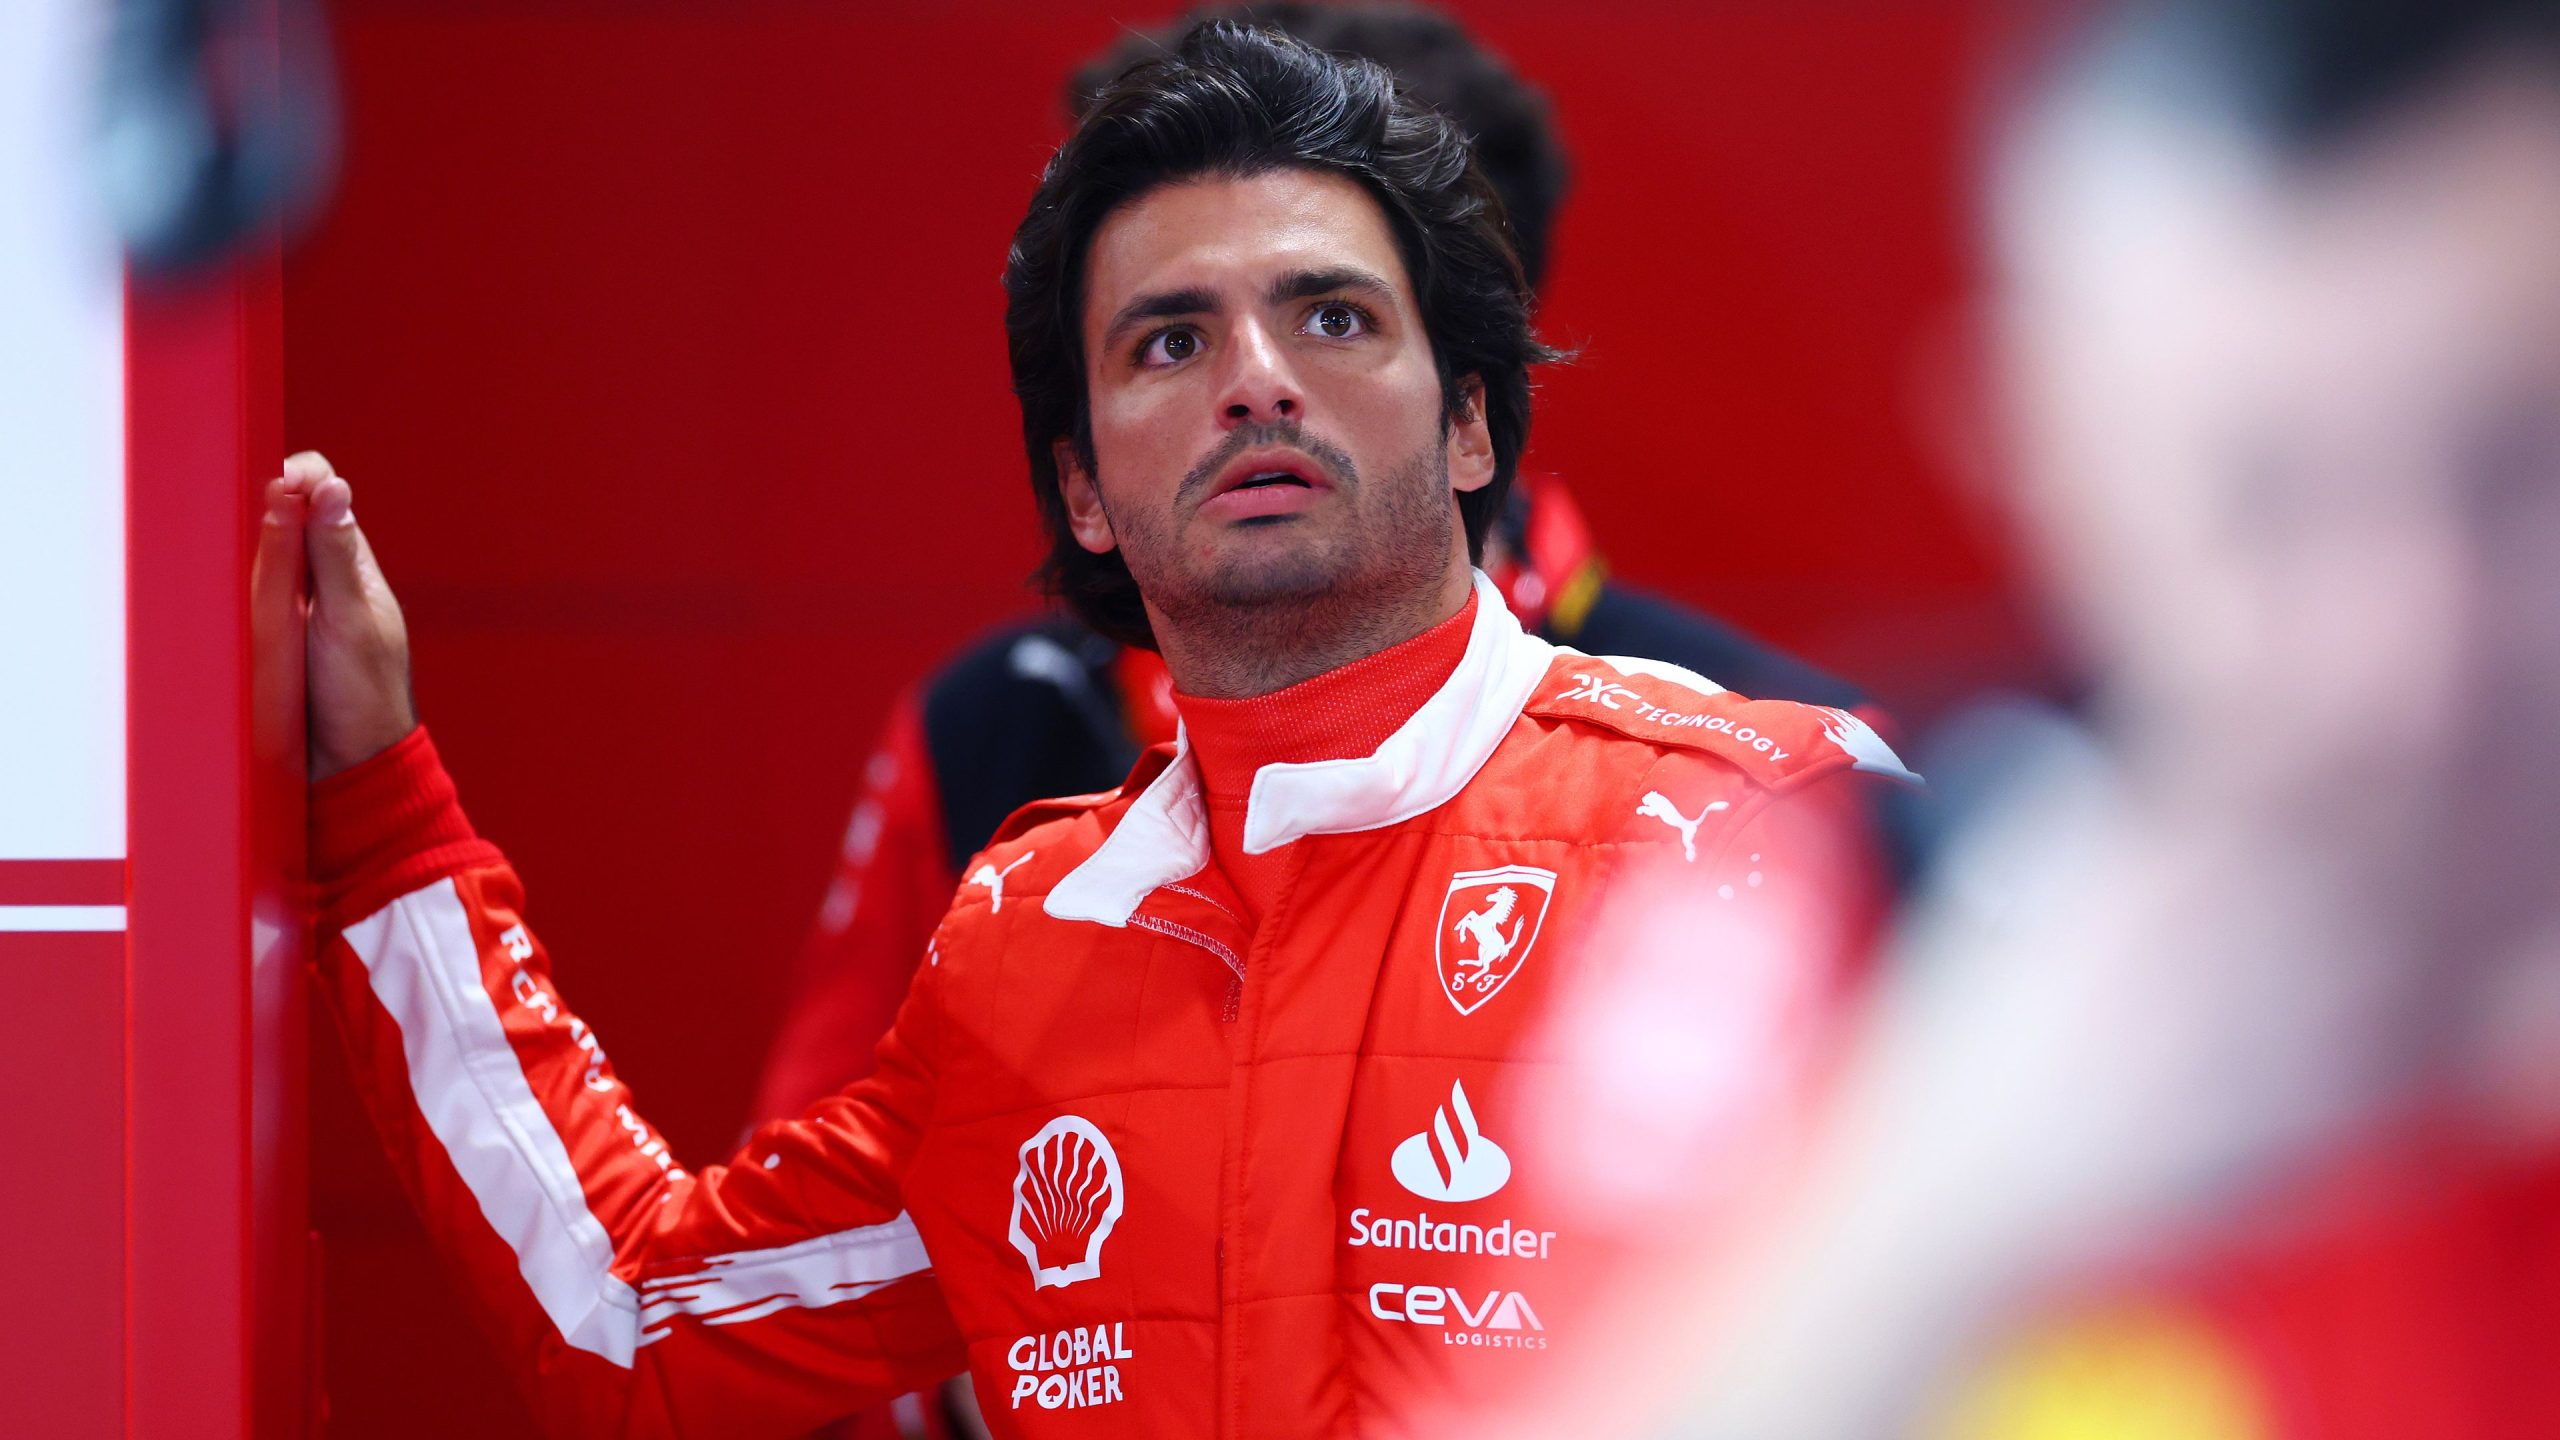 F﻿errari driver Carlos Sainz will take no further part in the Saudi Arabian Grand Prix weekend after being diagnosed with appendicitis.